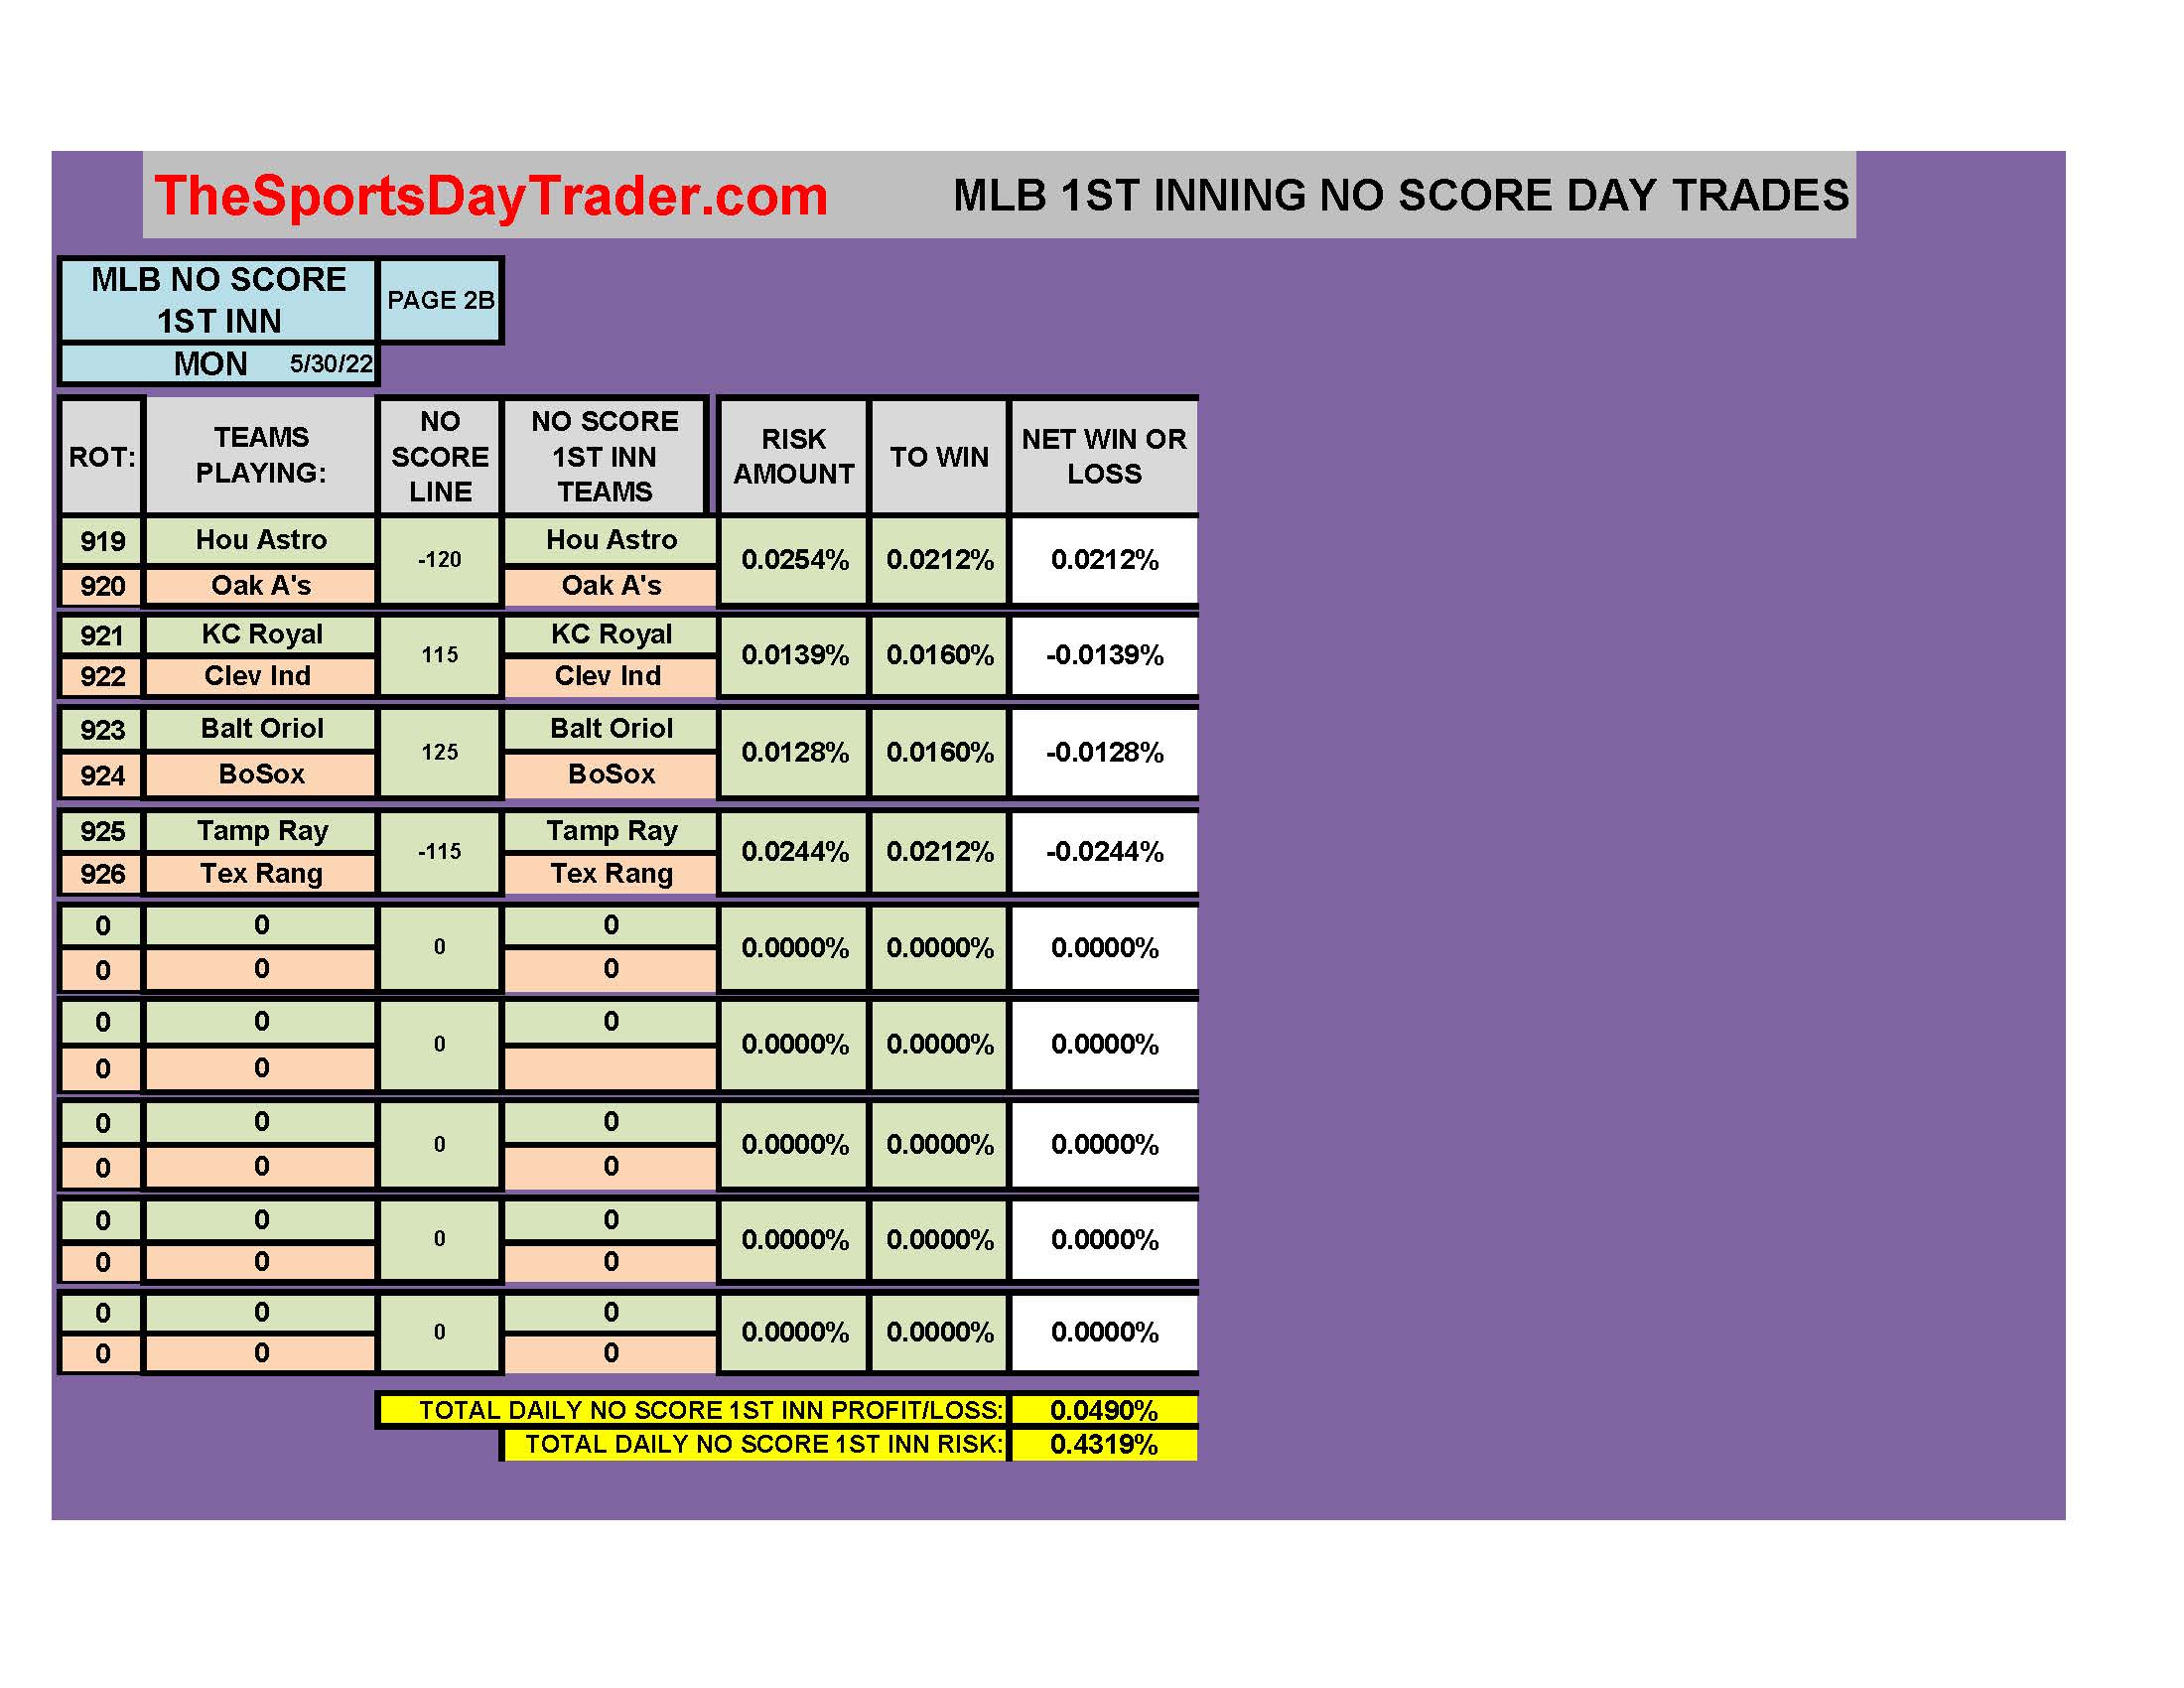 MLB 5/30/22 NO SCORE 1ST INNING DAILY RESULTS page 2